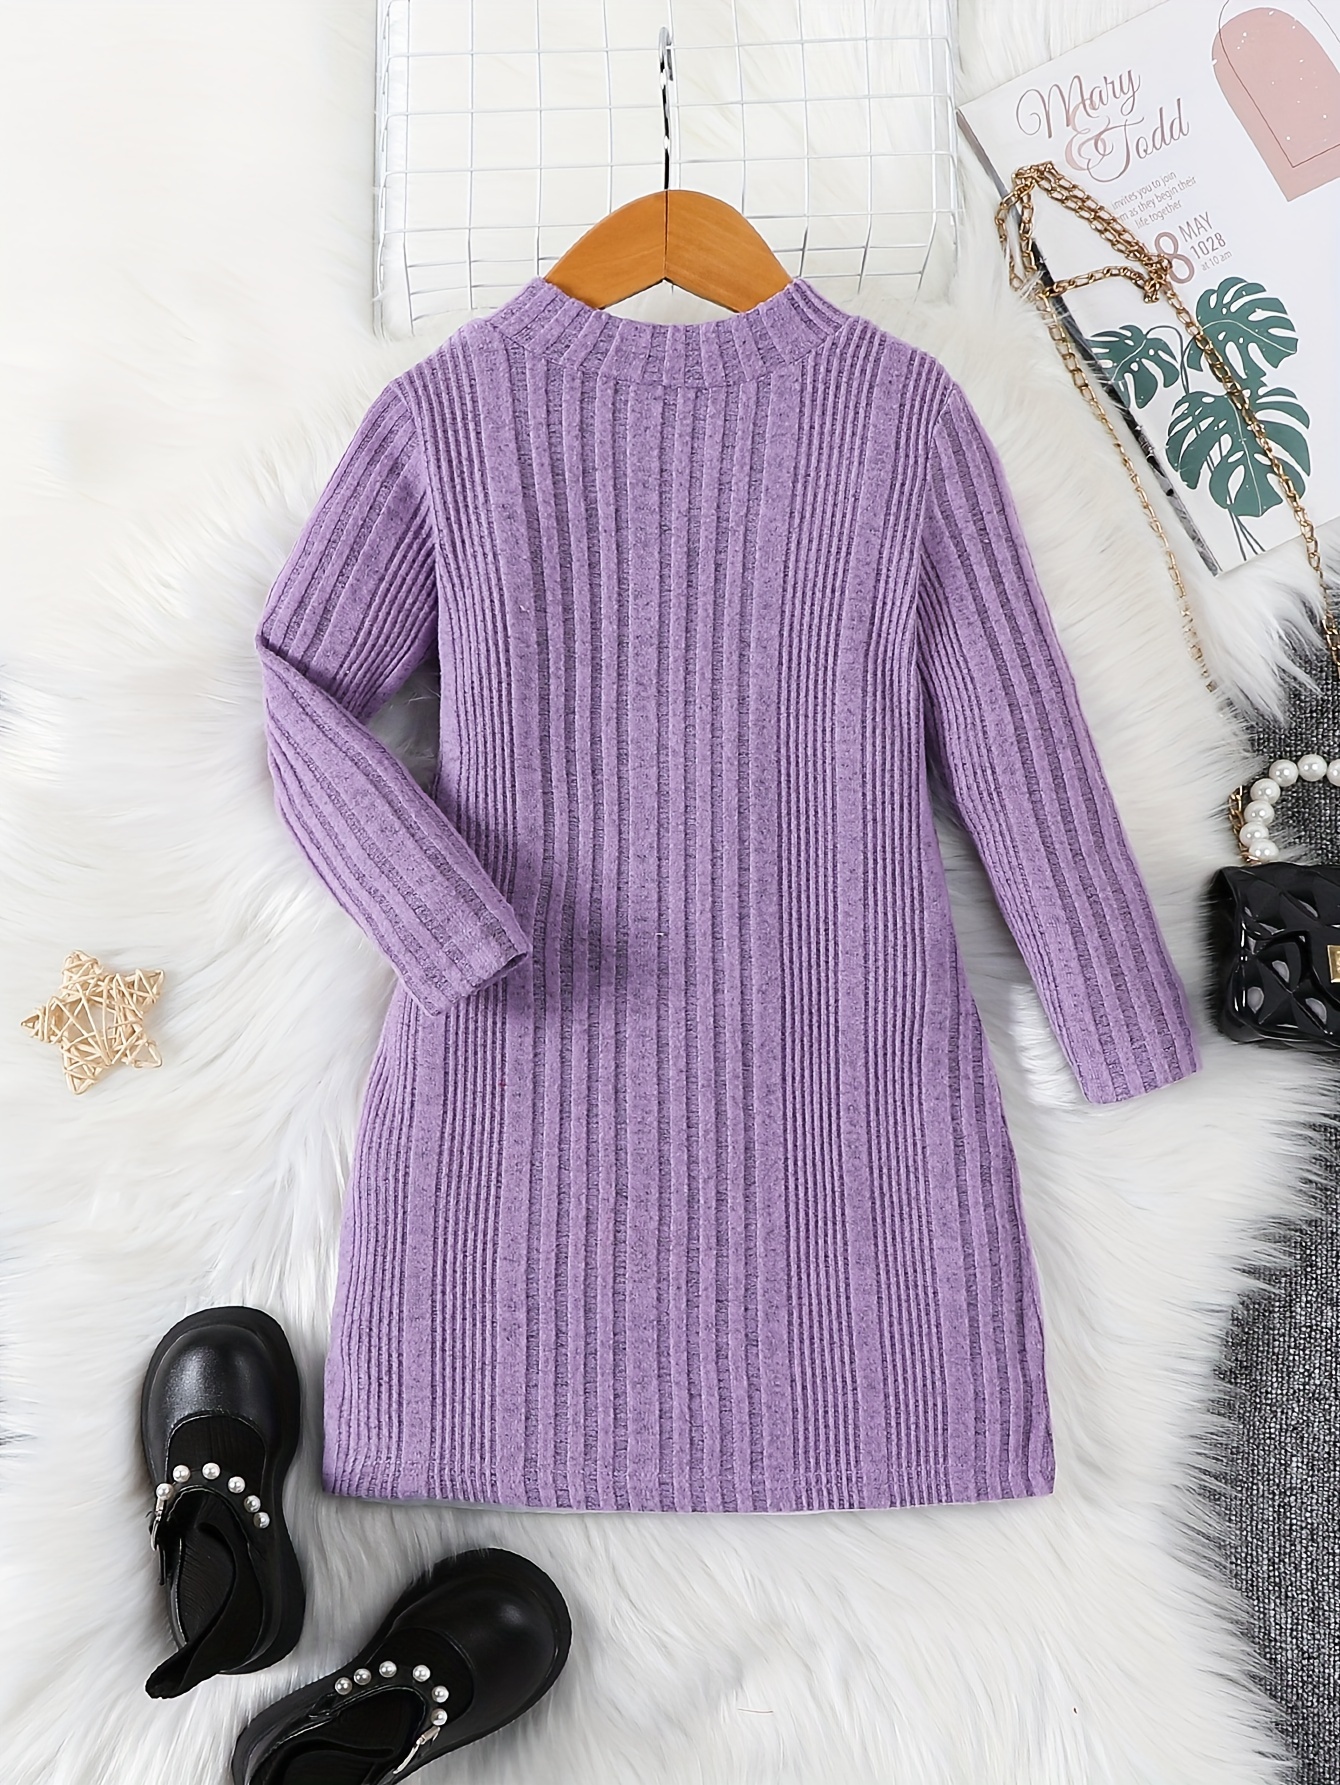 Girls Casual Knitted Thermal Crew Neck Sweater Dress For Winter